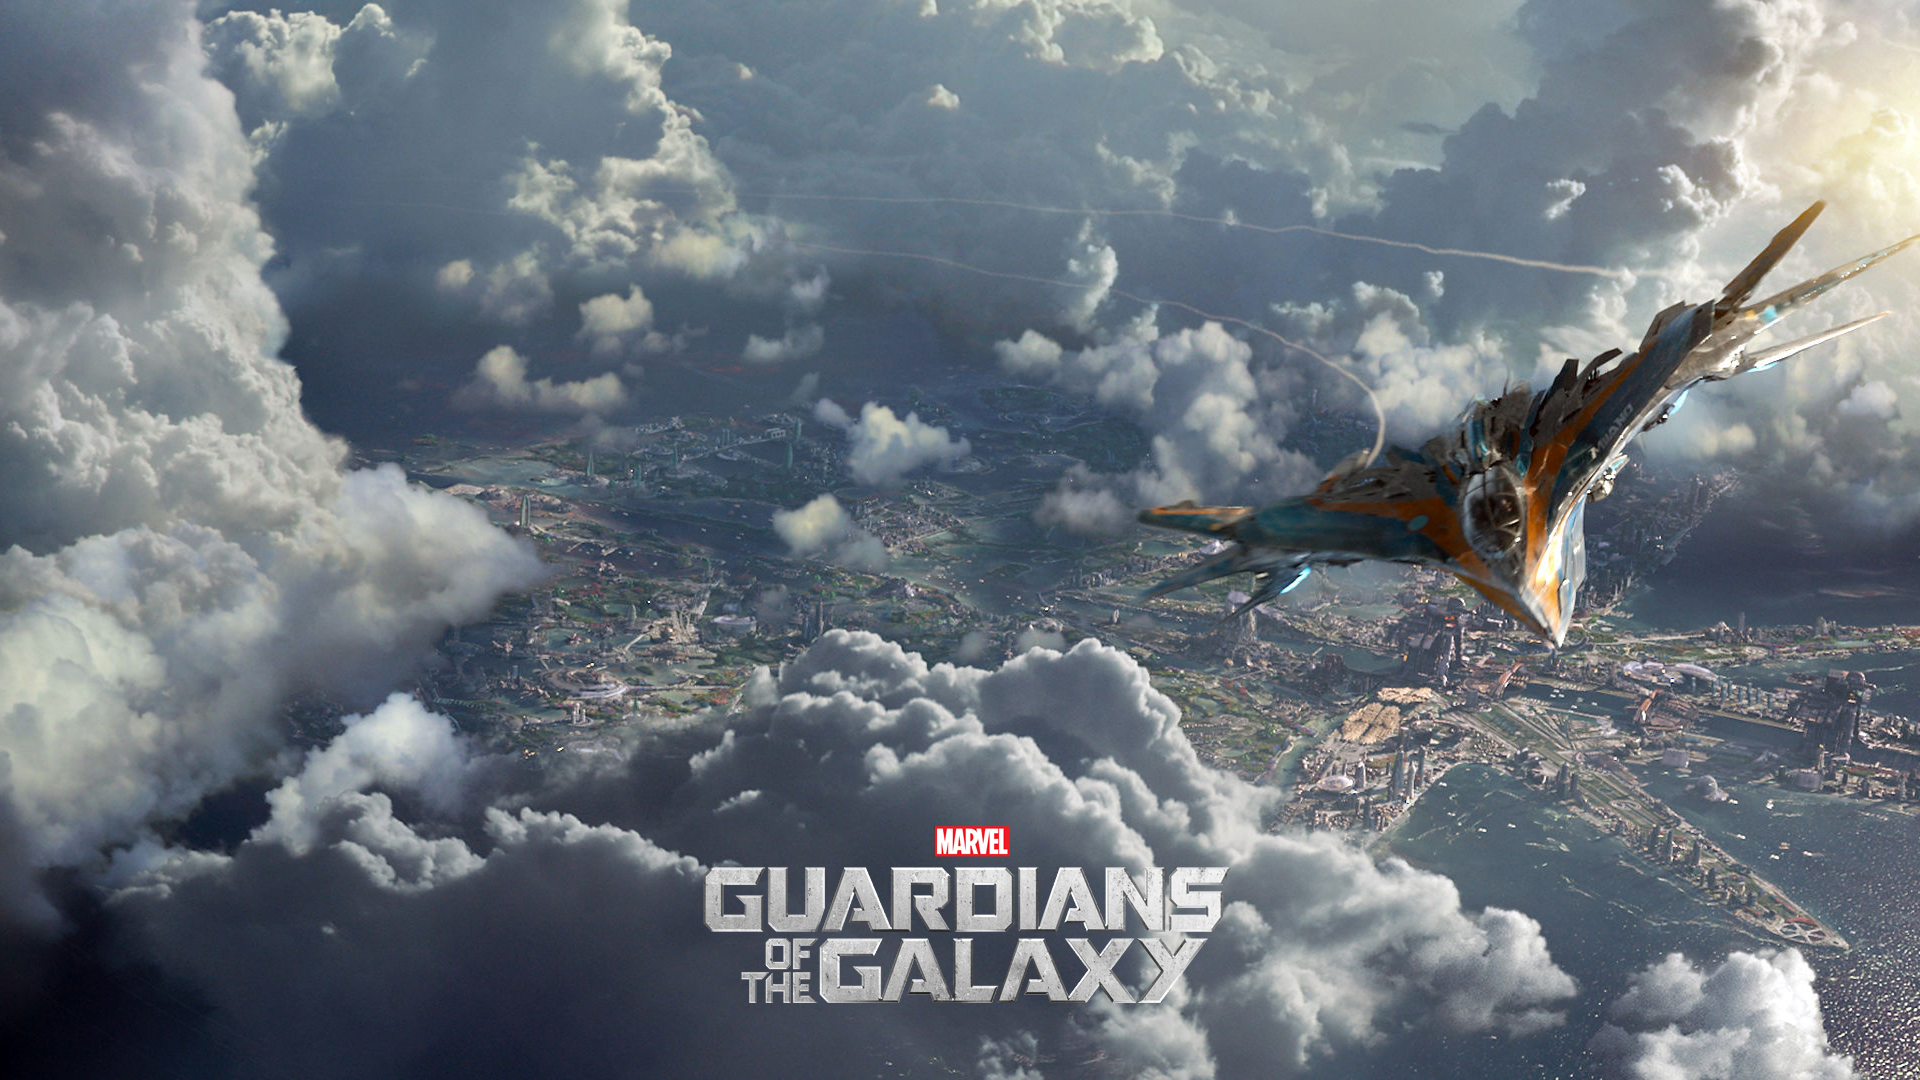 Guardians Of The Galaxy Aircraft Movie HD Wallpaper Image Picture